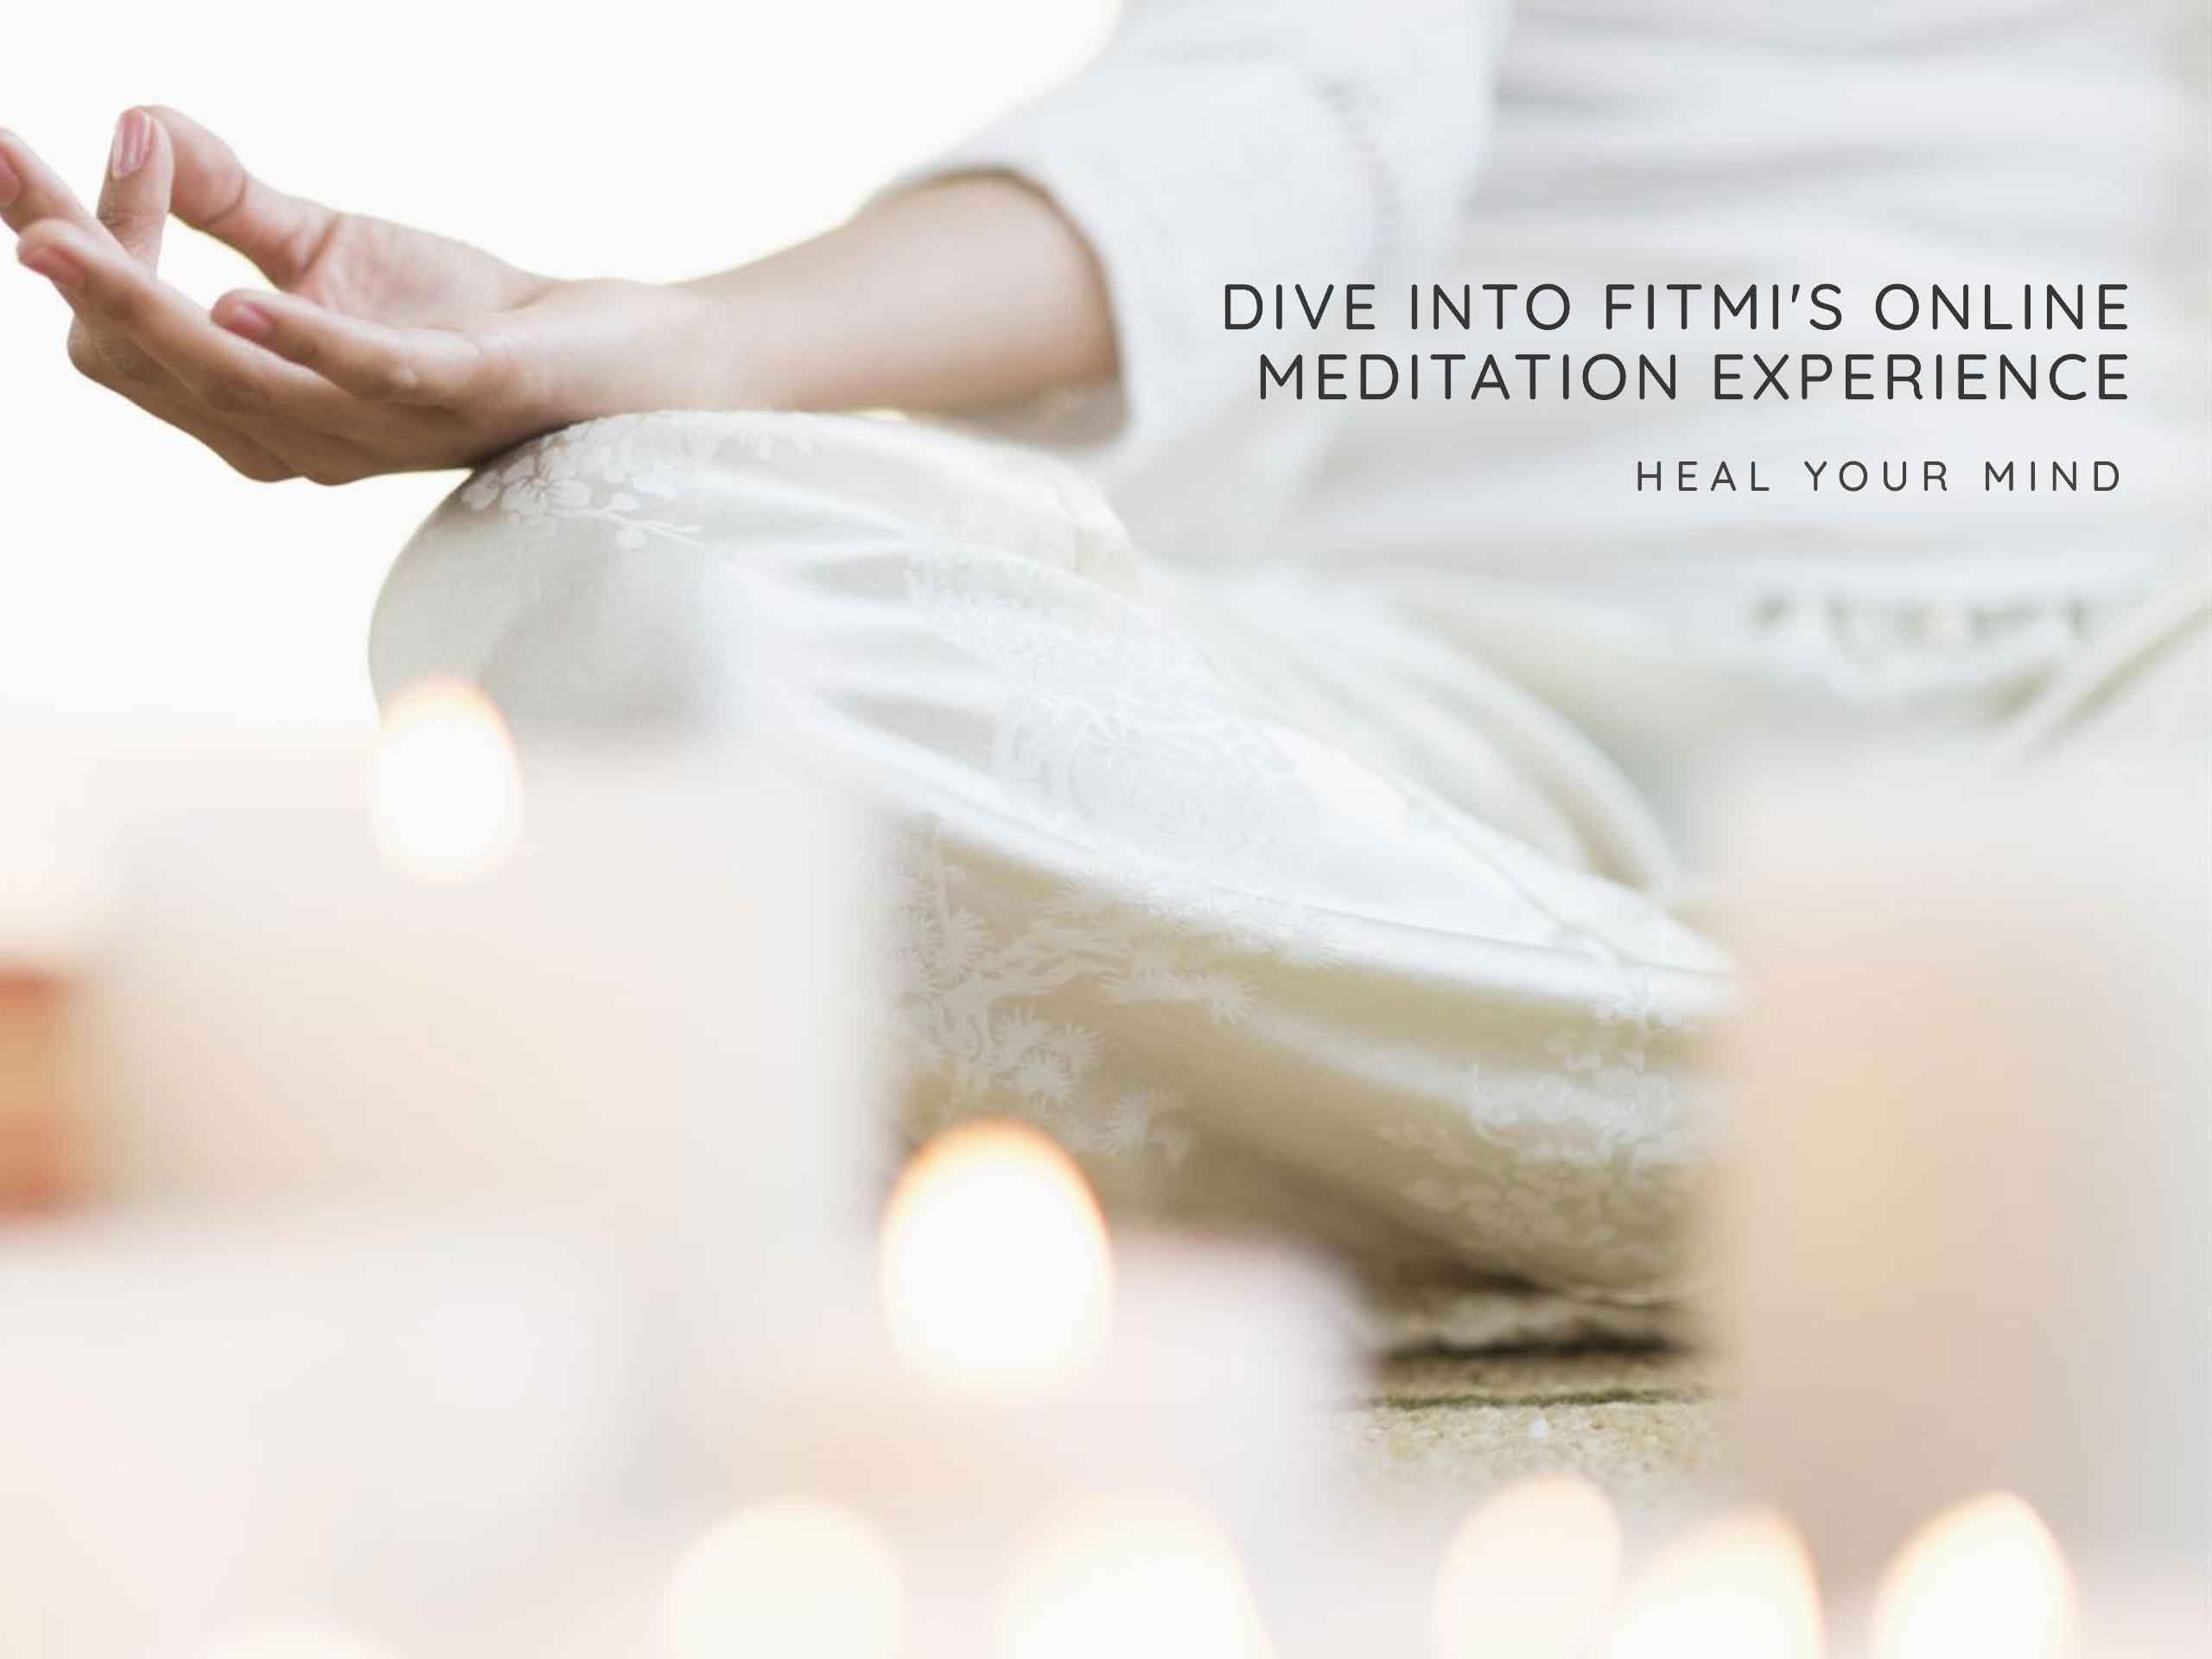 Heal Your Mind: Dive into FitMi's Online Meditation Experience